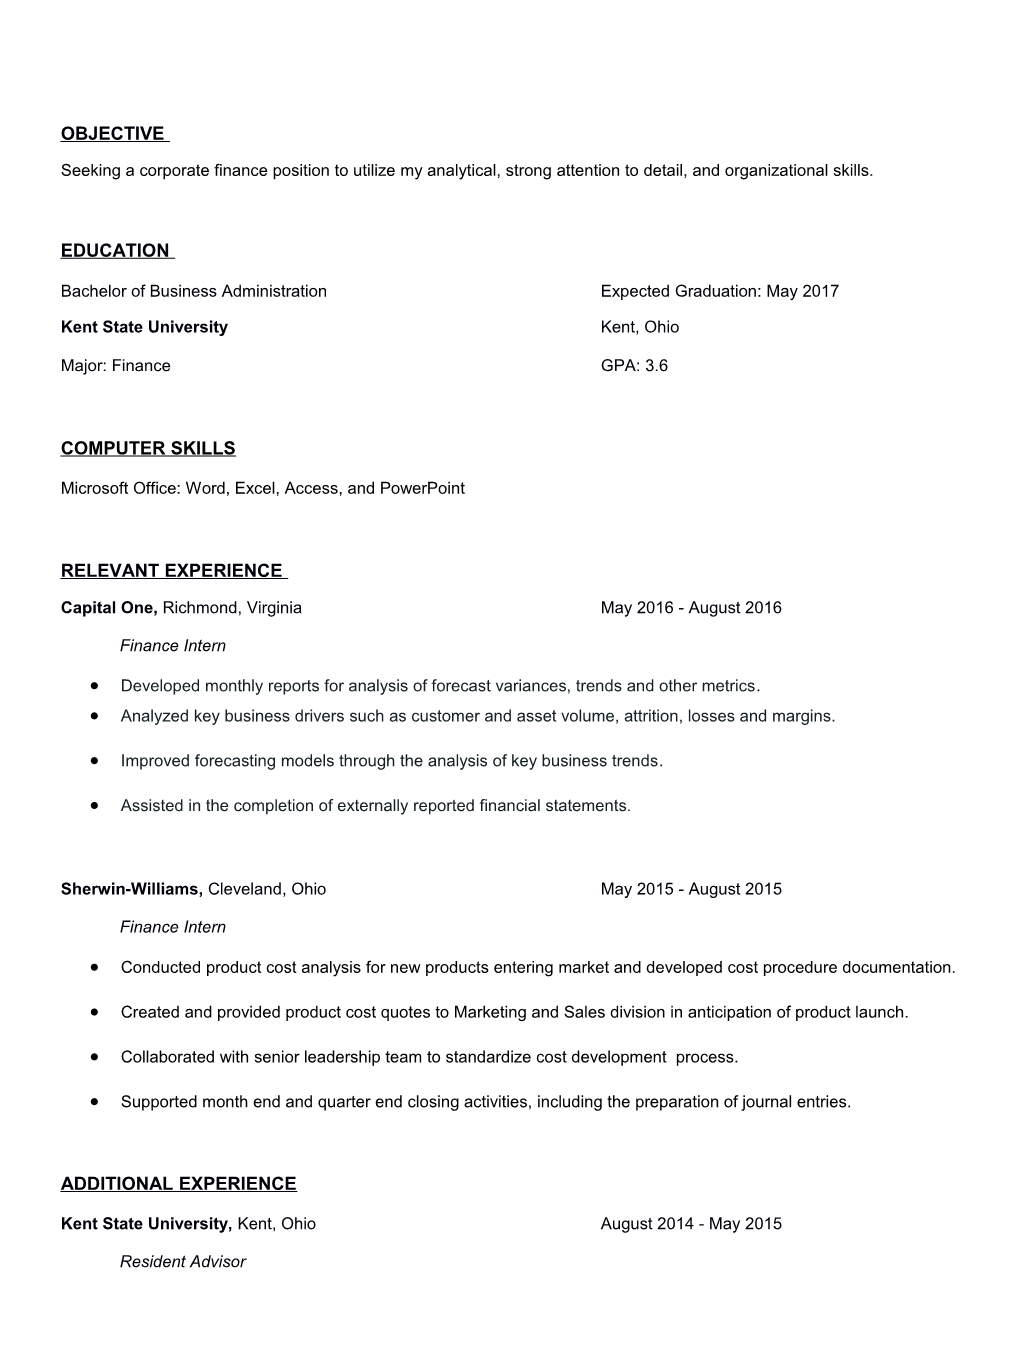 Seeking Acorporatefinanceposition to Utilize My Analytical, Strong Attention to Detail